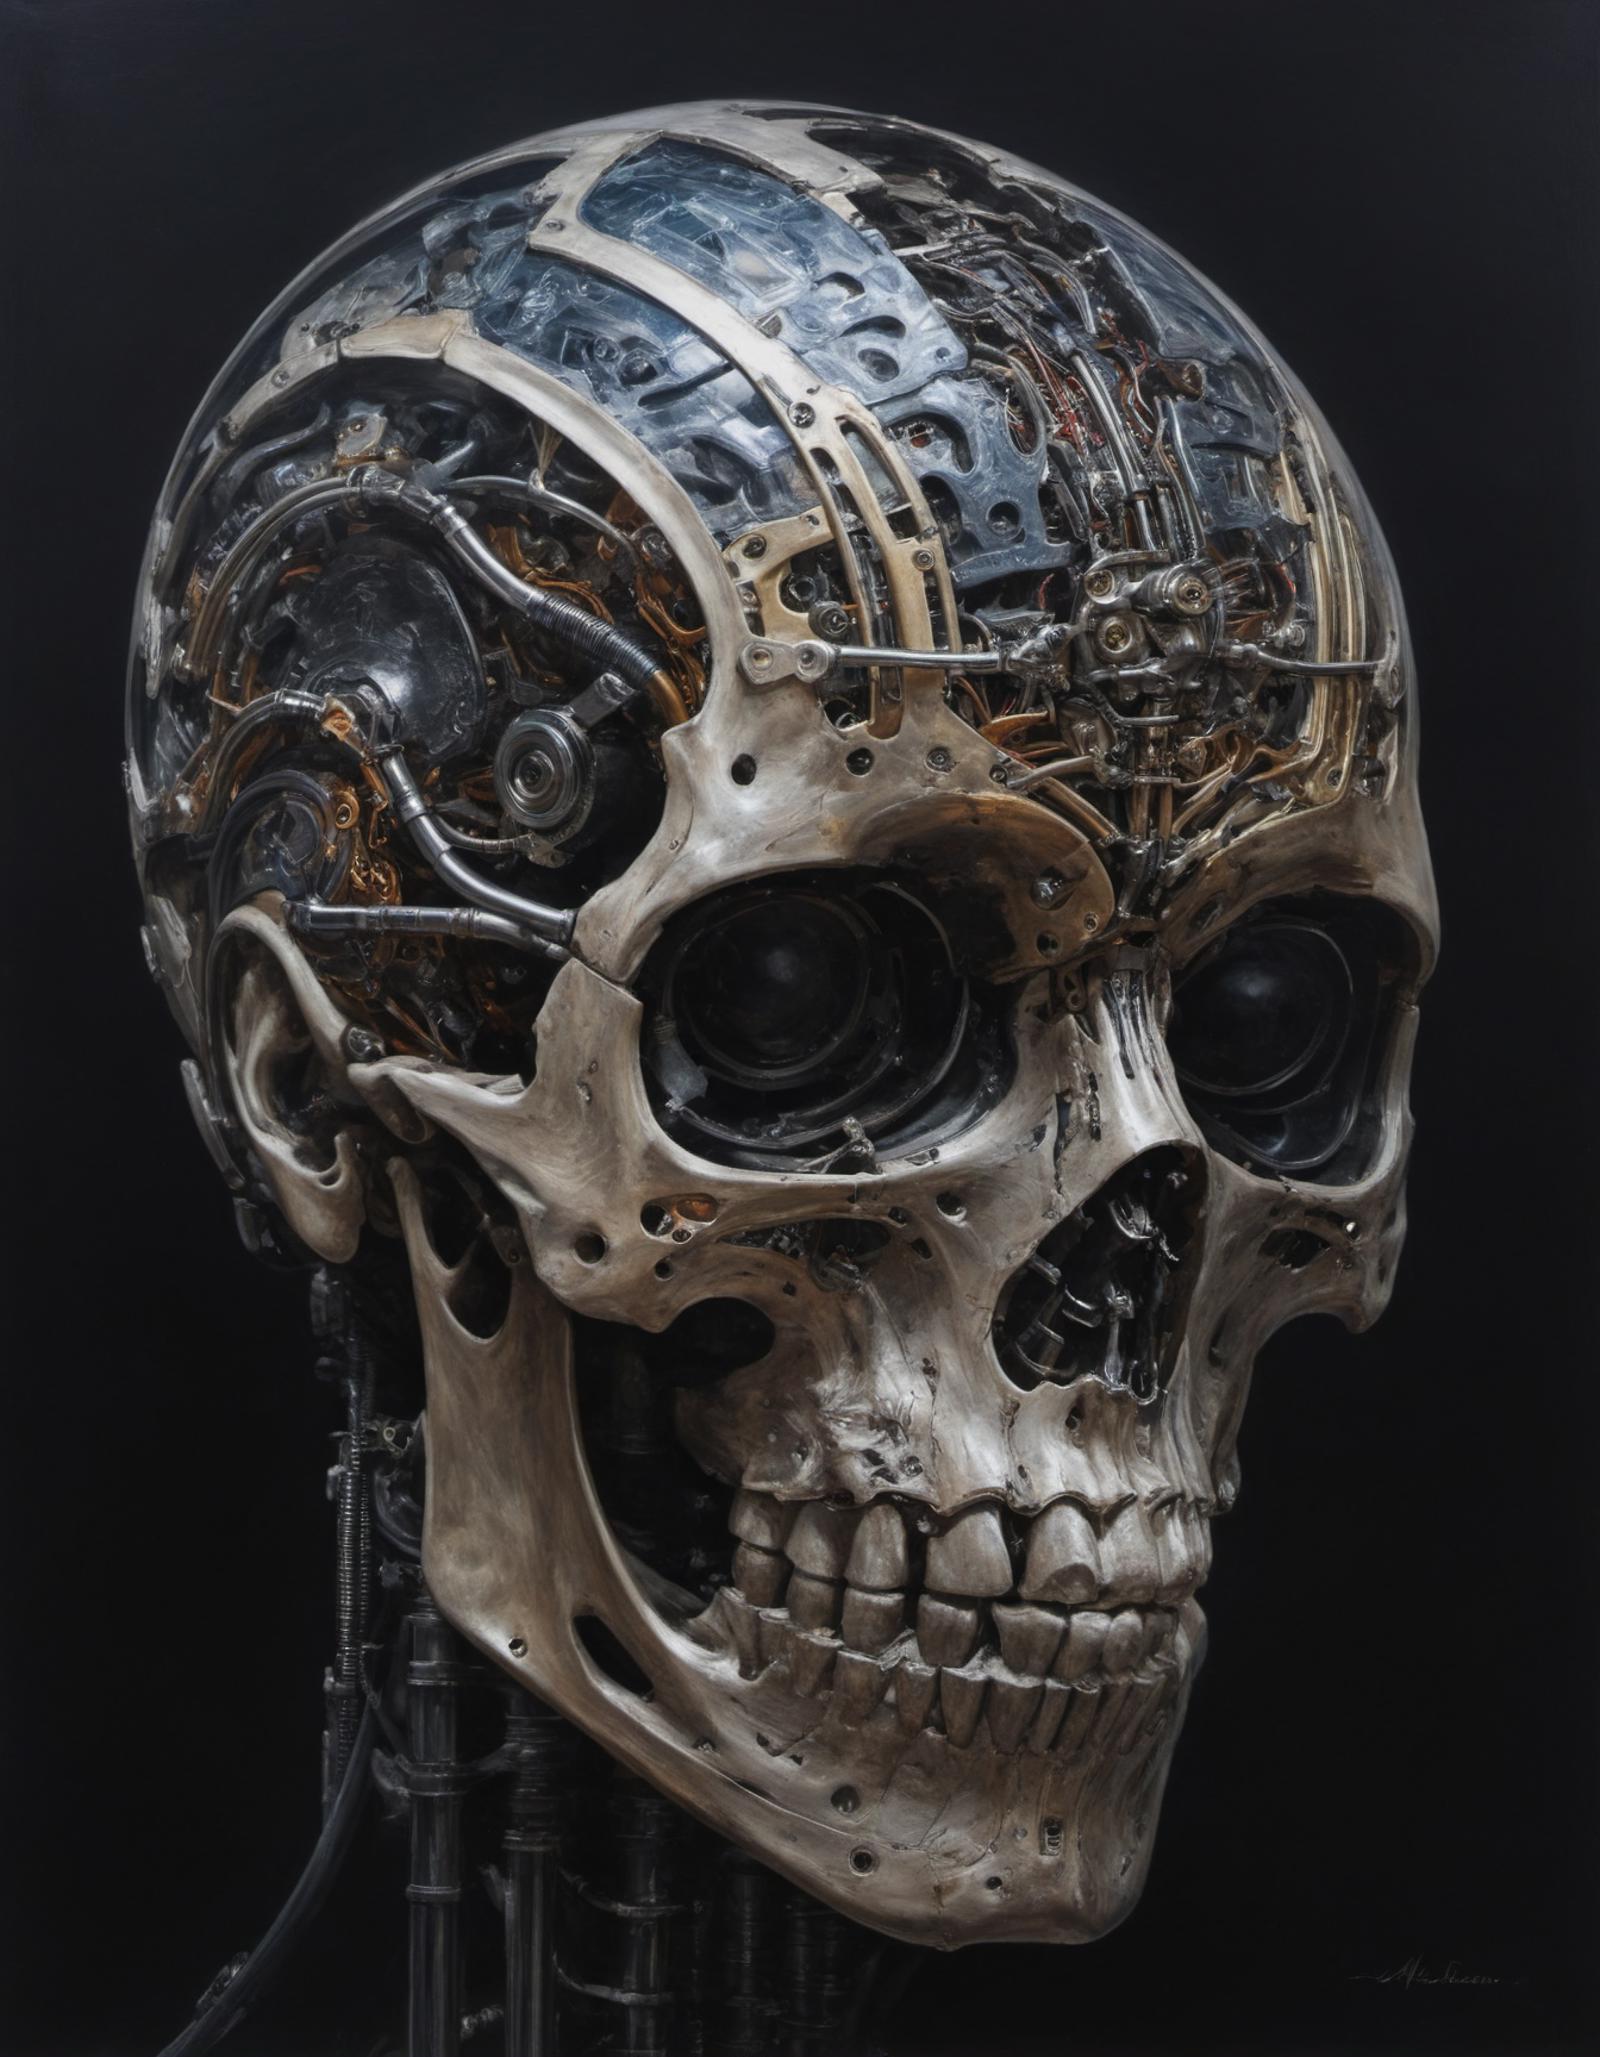 A robotic skull with a metal face and gears.